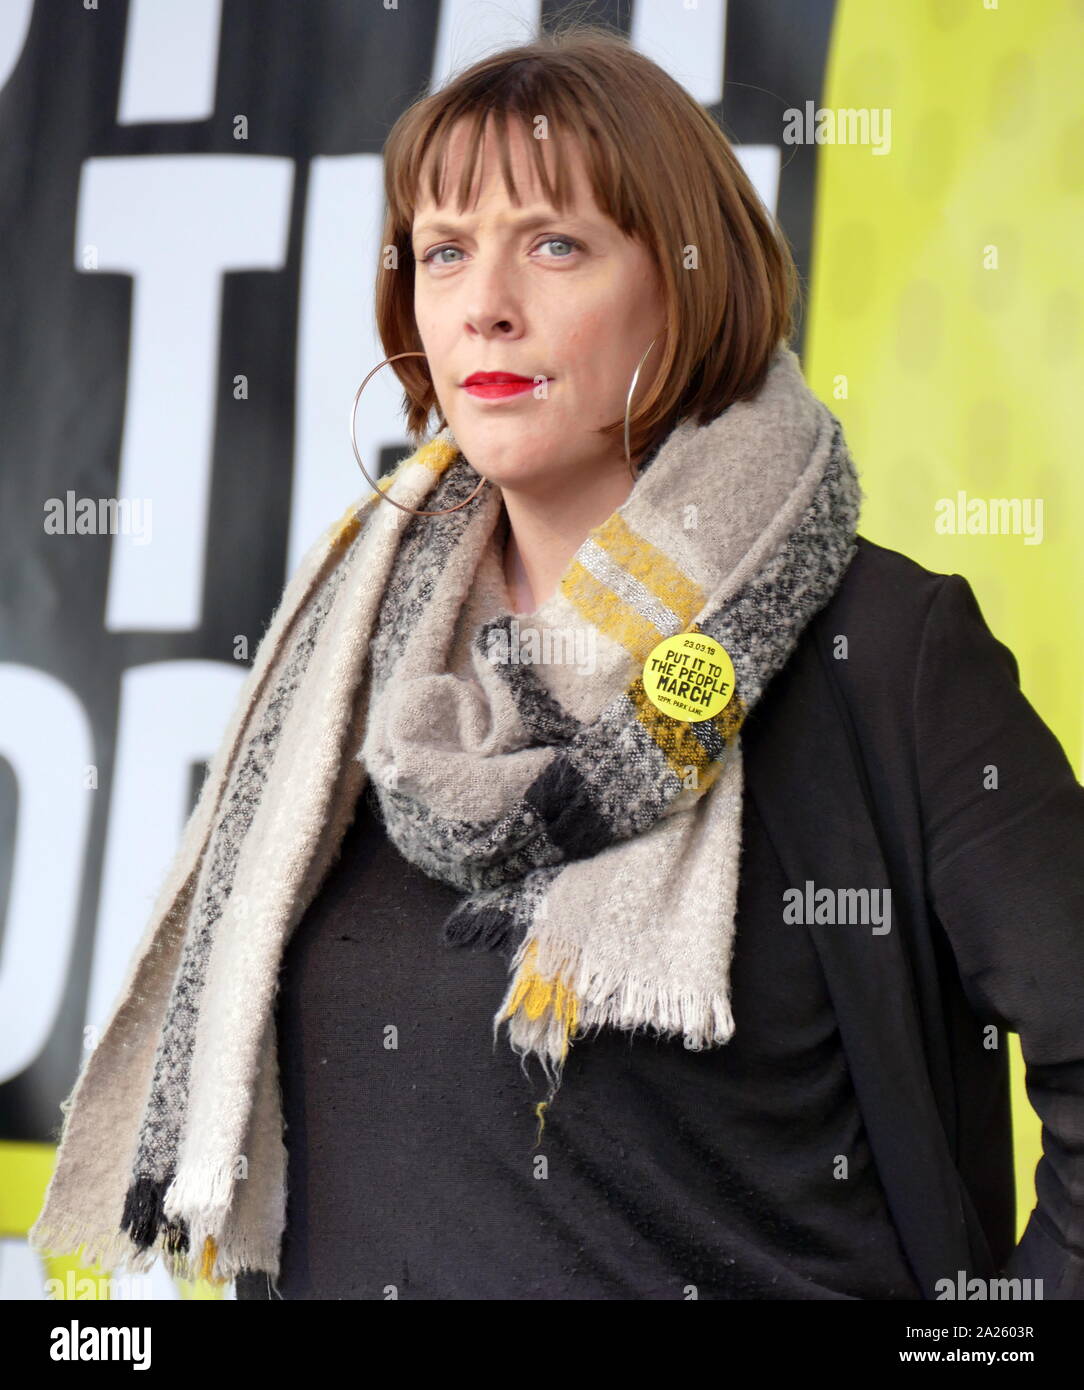 Jess Phillips, Labour Member of Parliament (MP) for Birmingham Yardley, addresses the 'People's Vote' march in Parliament Square, London. The People's Vote march took place in London on 23 March 2019 as part of a series of demonstrations to protest against Brexit, call for a new referendum, and ask the British Government to revoke Article 50. It brought to the capital hundreds of thousands of protestors, or over a million people according to the organizers. Stock Photo